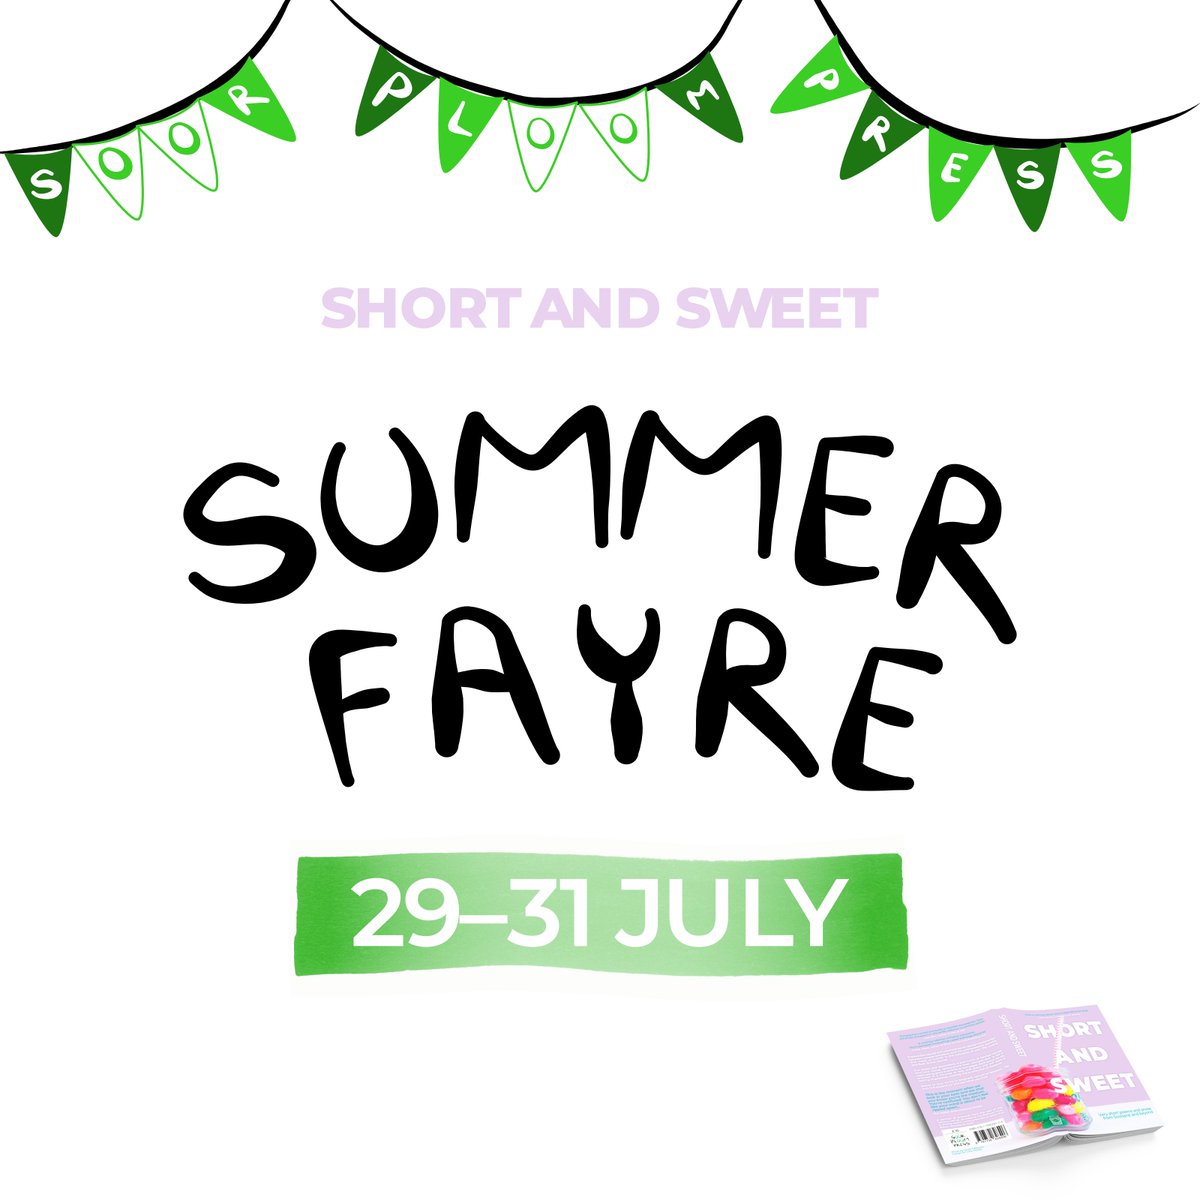 Presenting: Liane’s experiment in the digital delivery of an asynchronous book launch

A.K.A.

🟢The Soor Ploom Press 🟢
🍬SHORT AND SWEET 🍬
🌞SUMMER FAYRE🌞

Let’s have a bit of fun!

p.s. it's online!